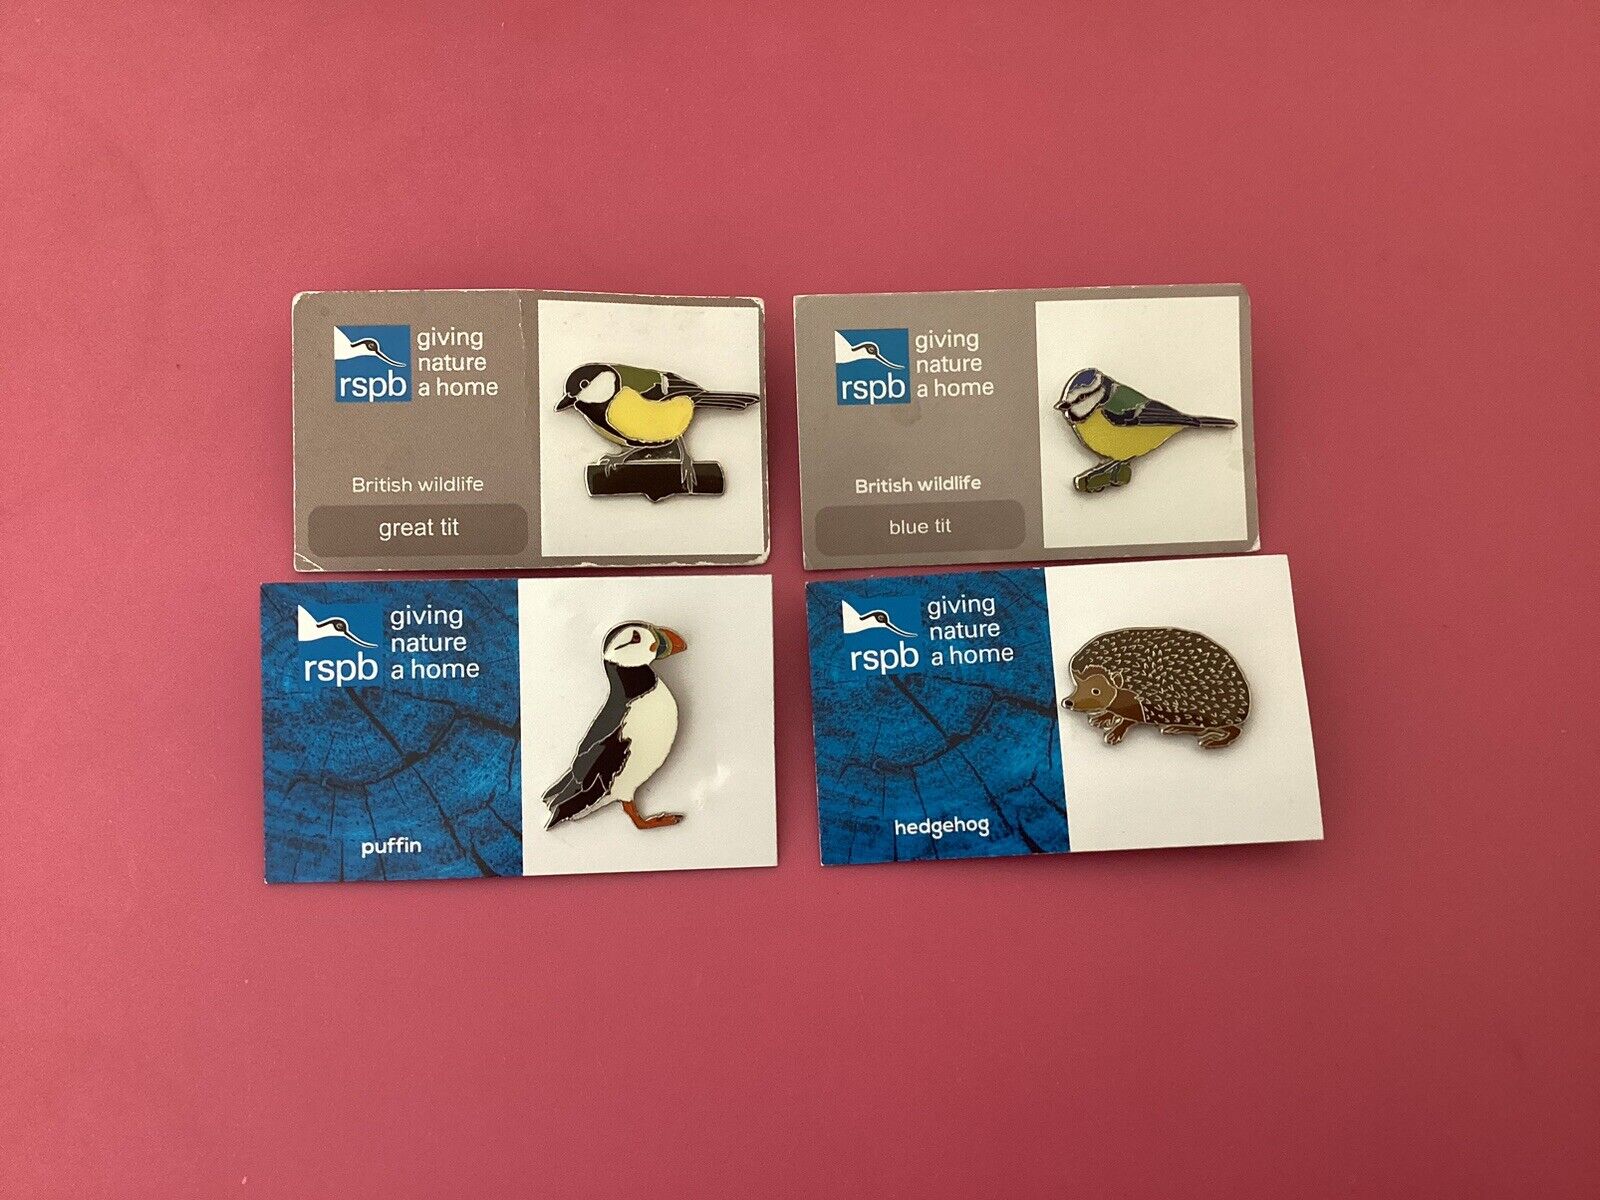 4 (FOUR) RSPB ENAMEL PIN BADGES … EACH NEW AND ITS DISCONTINUED RSPB CARD